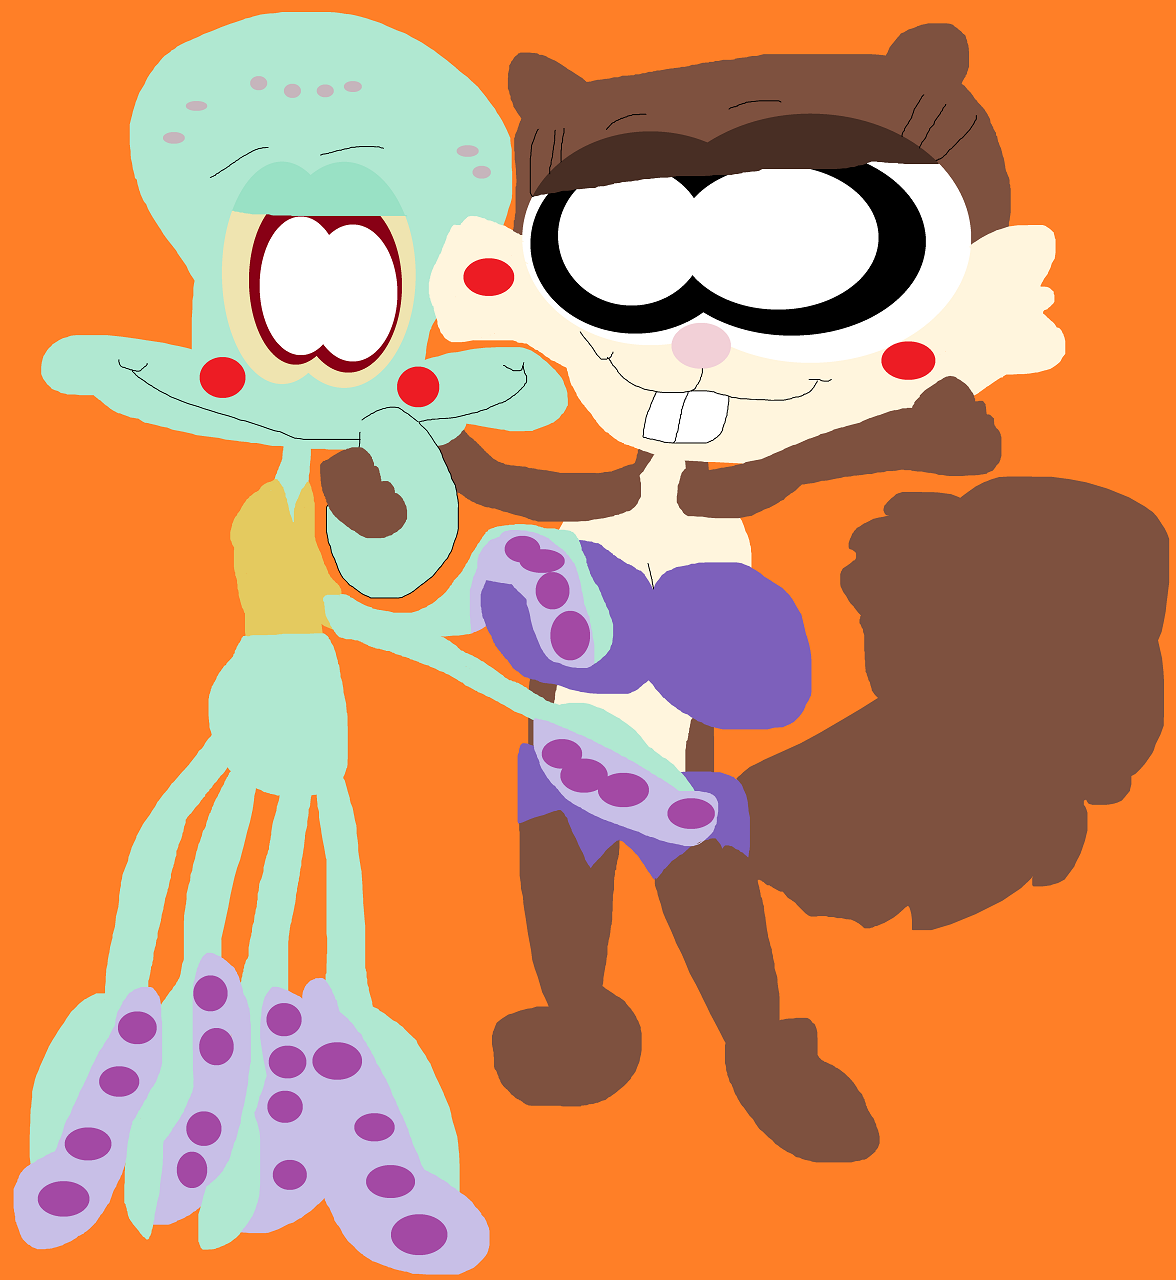 Random Squidward And Sandy About To Kiss by Falconlobo